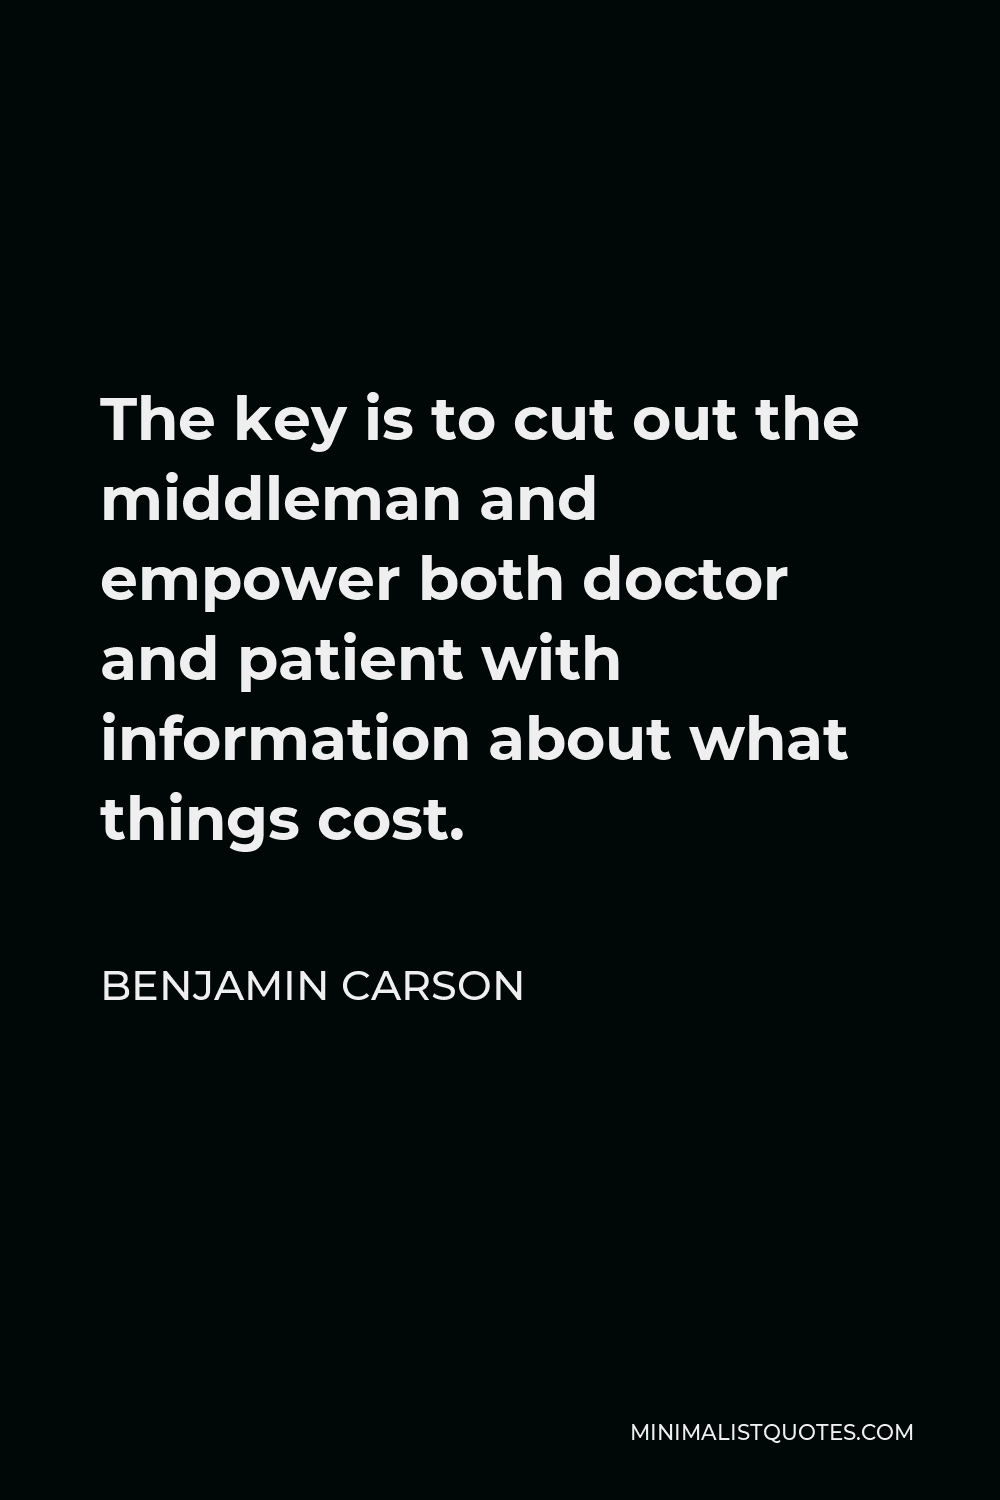 Benjamin Carson Quote - The key is to cut out the middleman and empower both doctor and patient with information about what things cost.